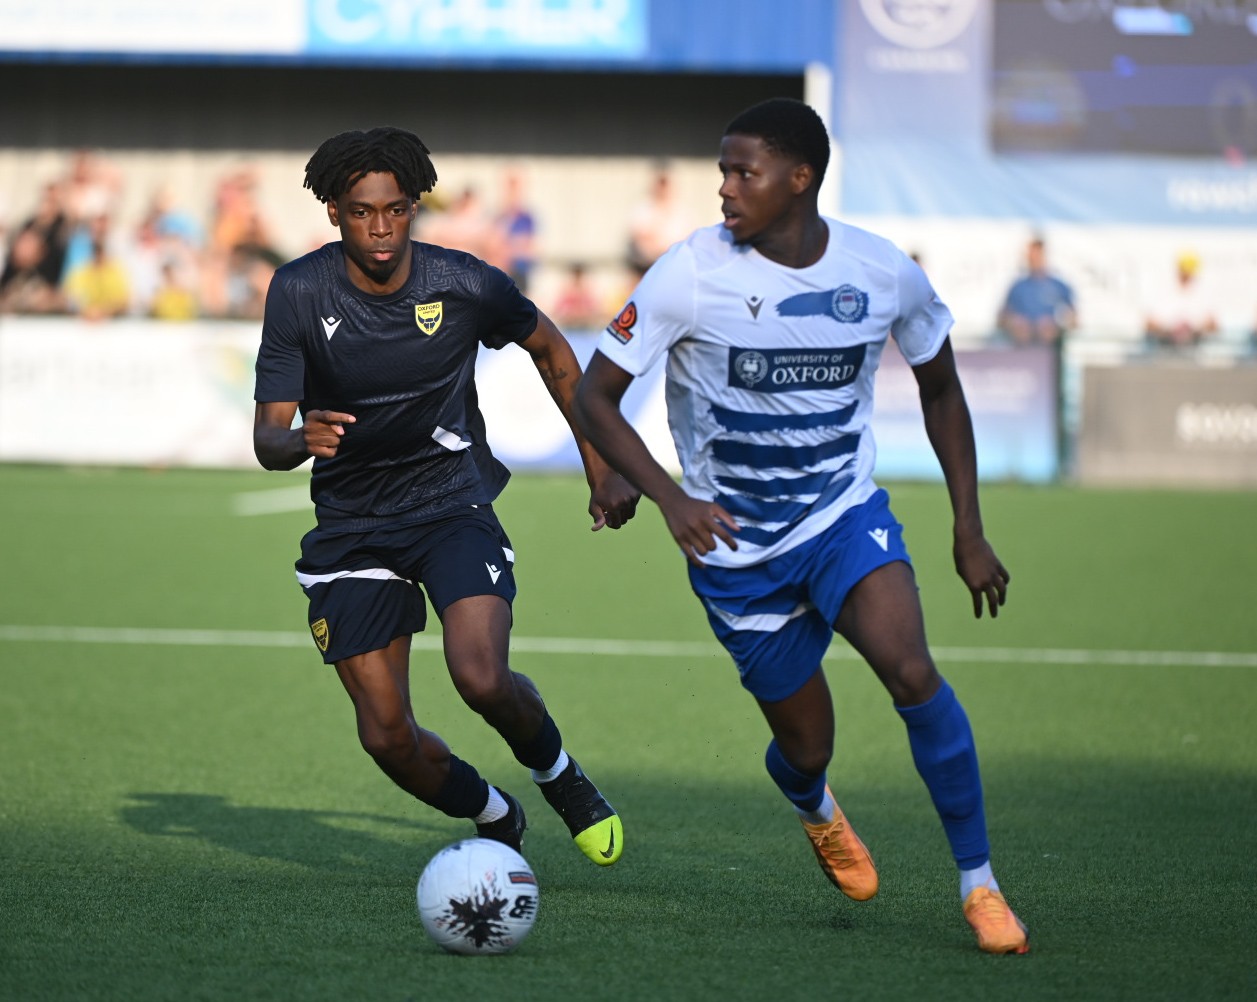 Former Liverpool winger Ovie Ejaria on trial with Oxford United